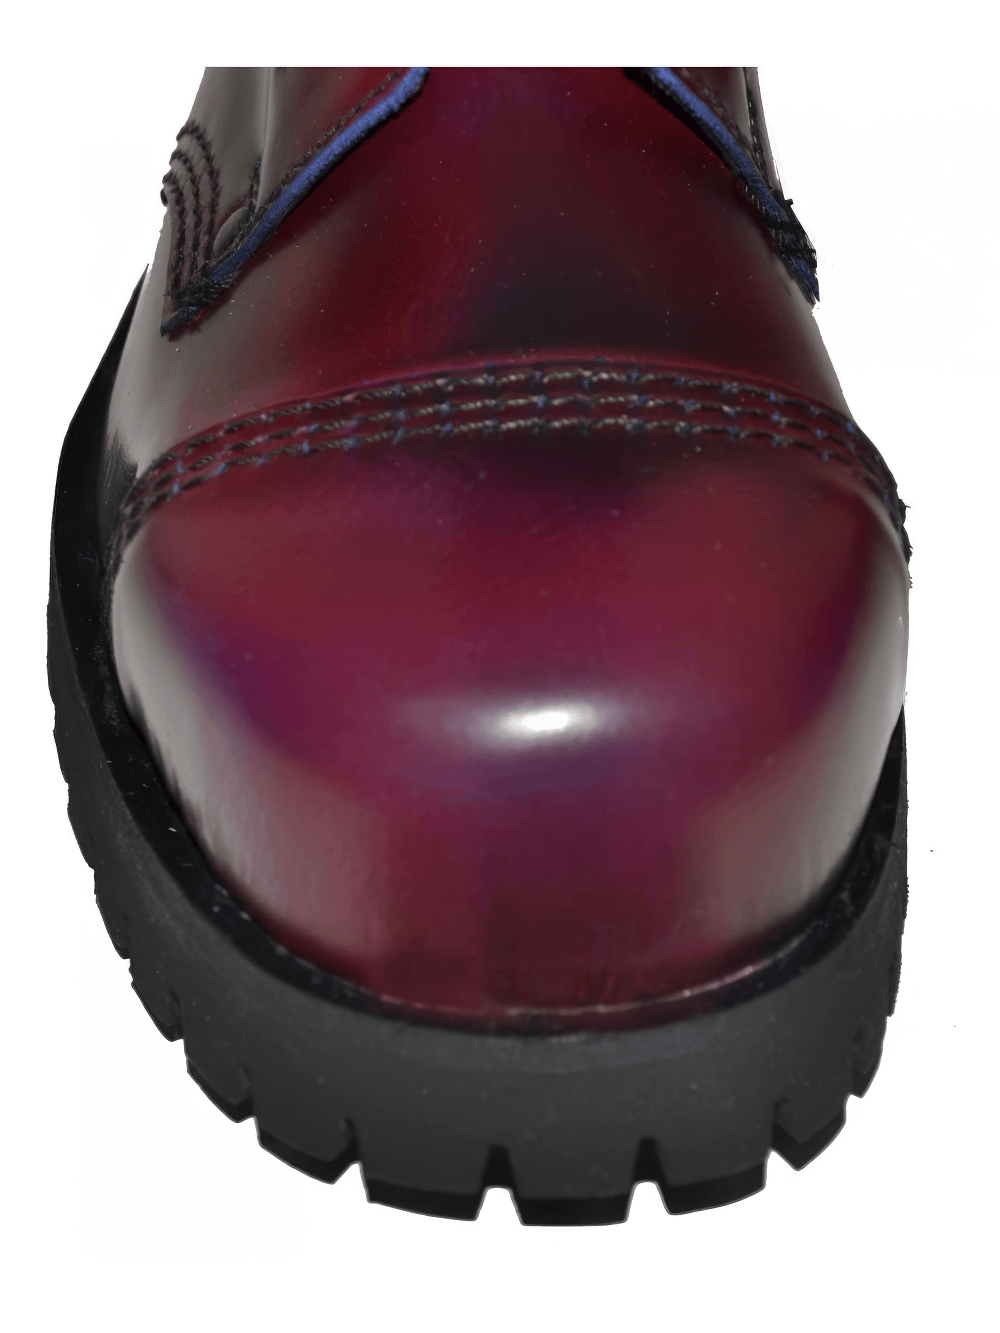 Wine Red Leather Lace Up Punk Boots for Men and Women